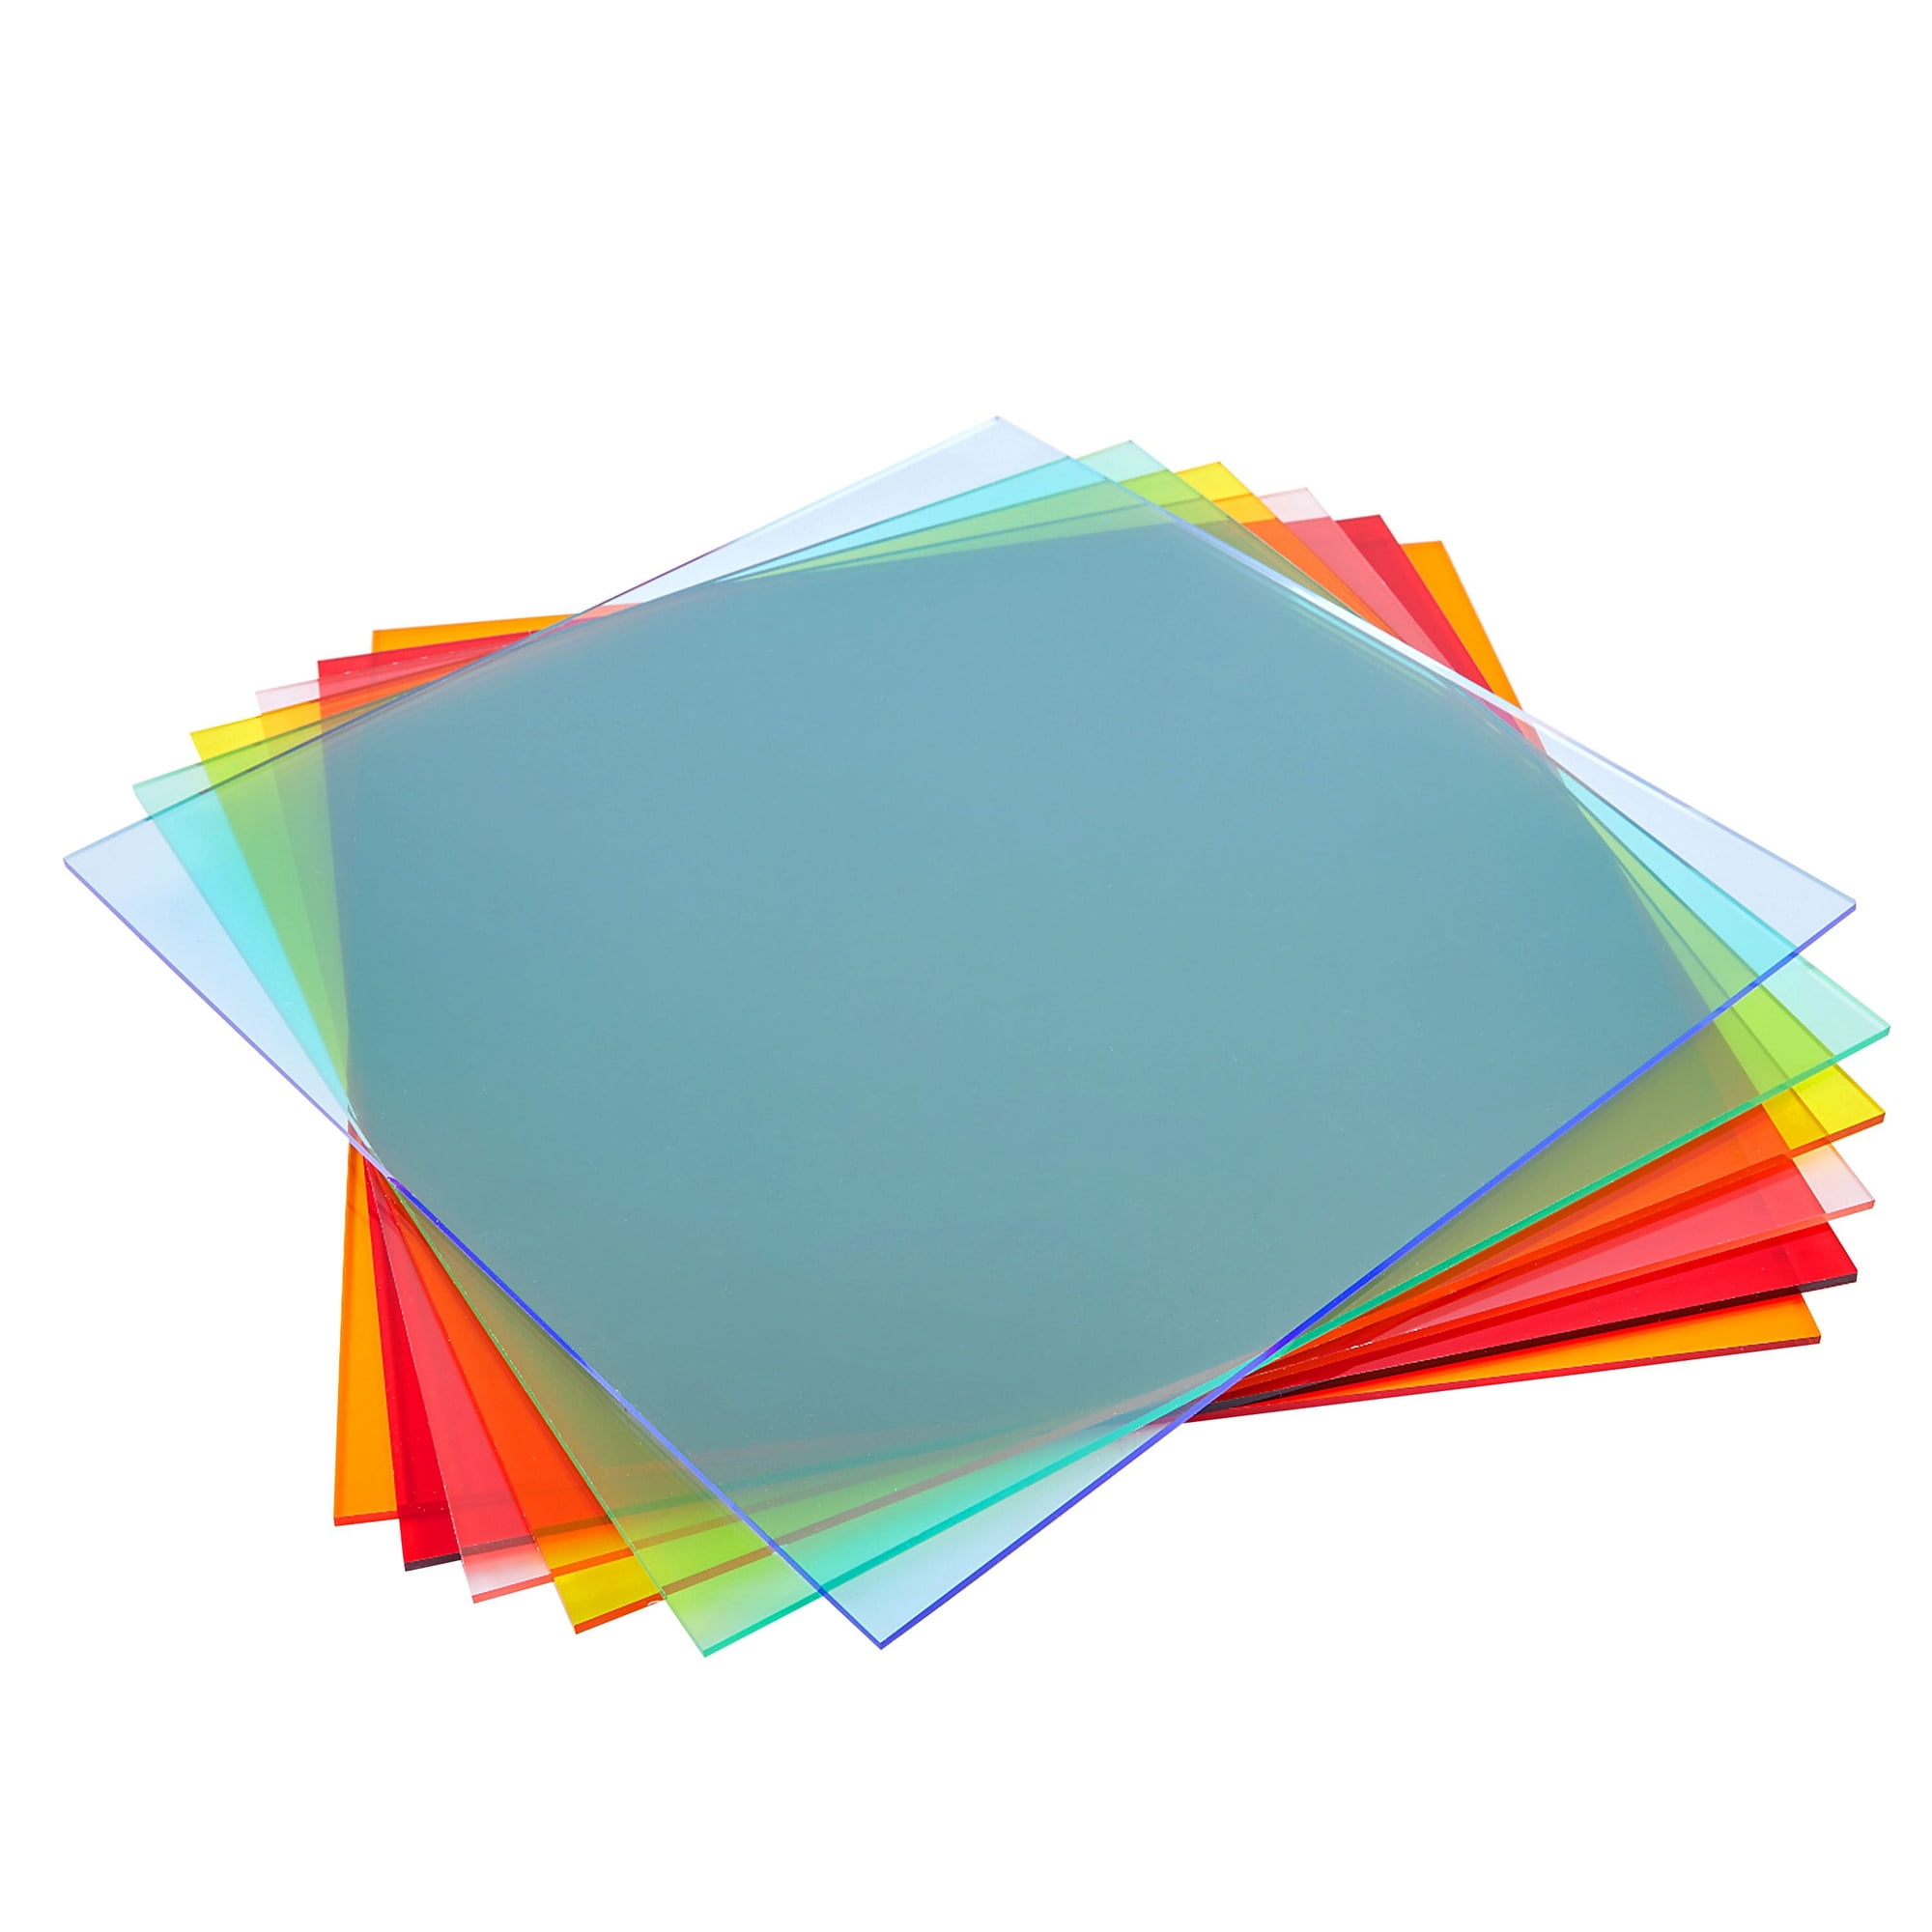  8 Pack Colored Acrylic Sheets 8 X 12 Inch, Translucent Cast Acrylic  Sheet Plexiglass Sheet 1/8 Inch Thick Acrylic Panel Colored Plastic Sheets  for Art Crafts Painting DIY Display, 8 Colors : Industrial & Scientific